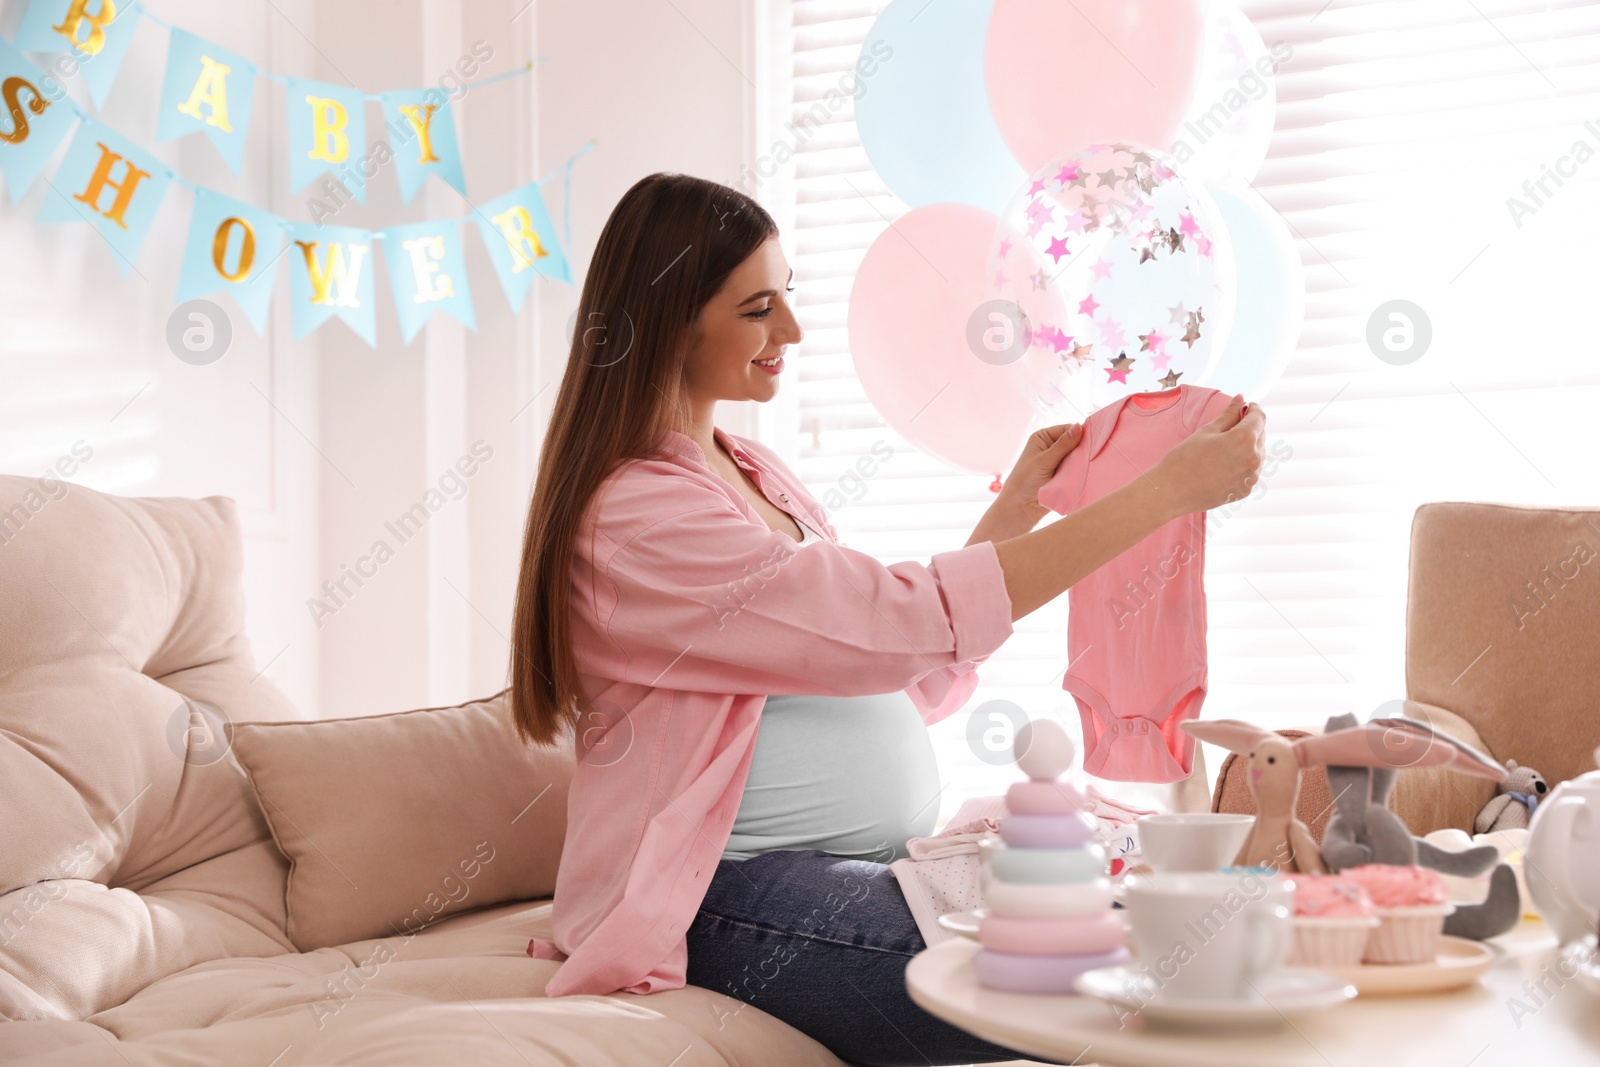 Photo of Happy pregnant woman holding onesie in room decorated for baby shower party